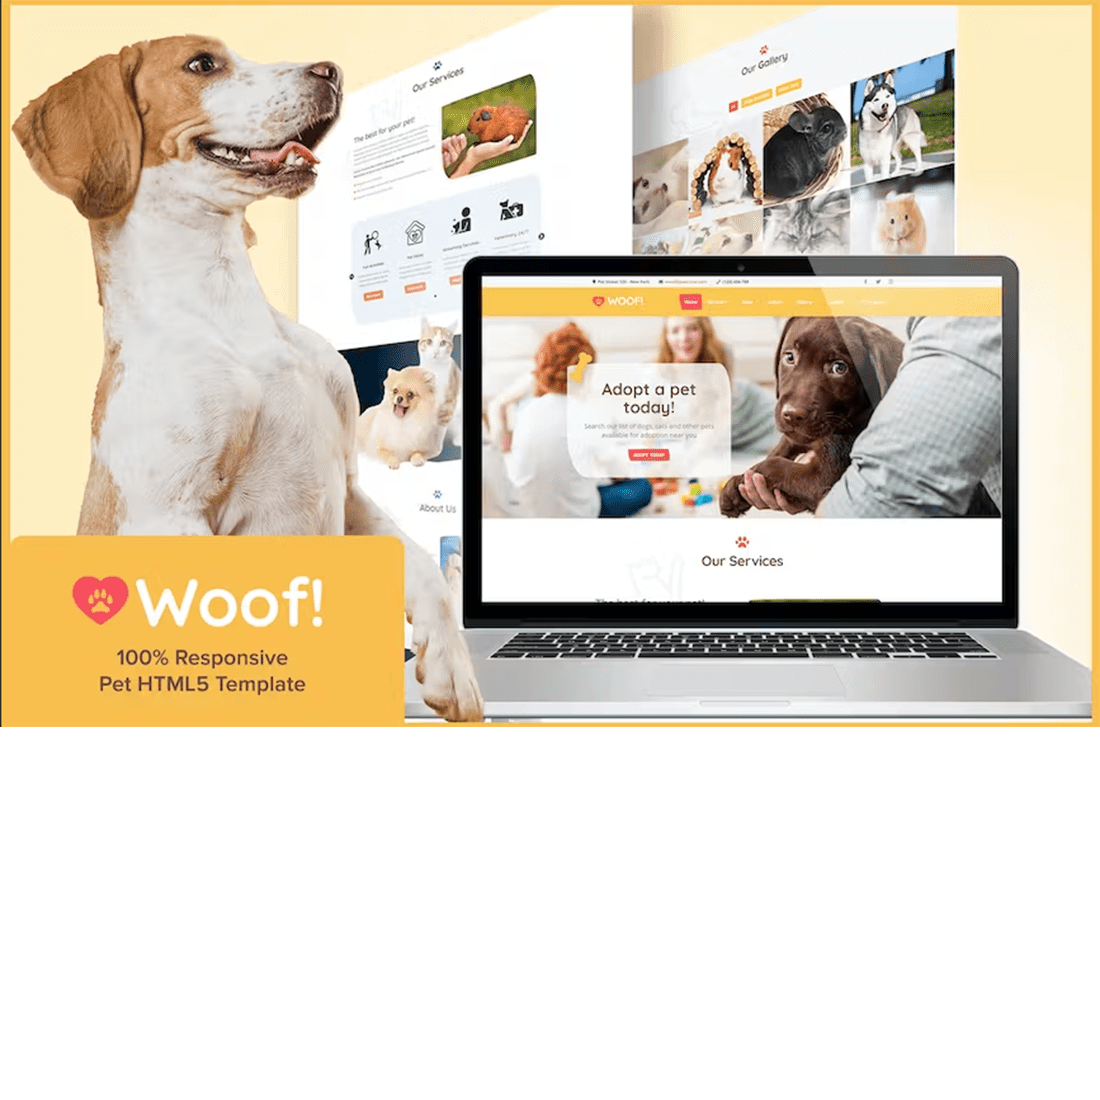 Free Pet Animal Website Template cover image.